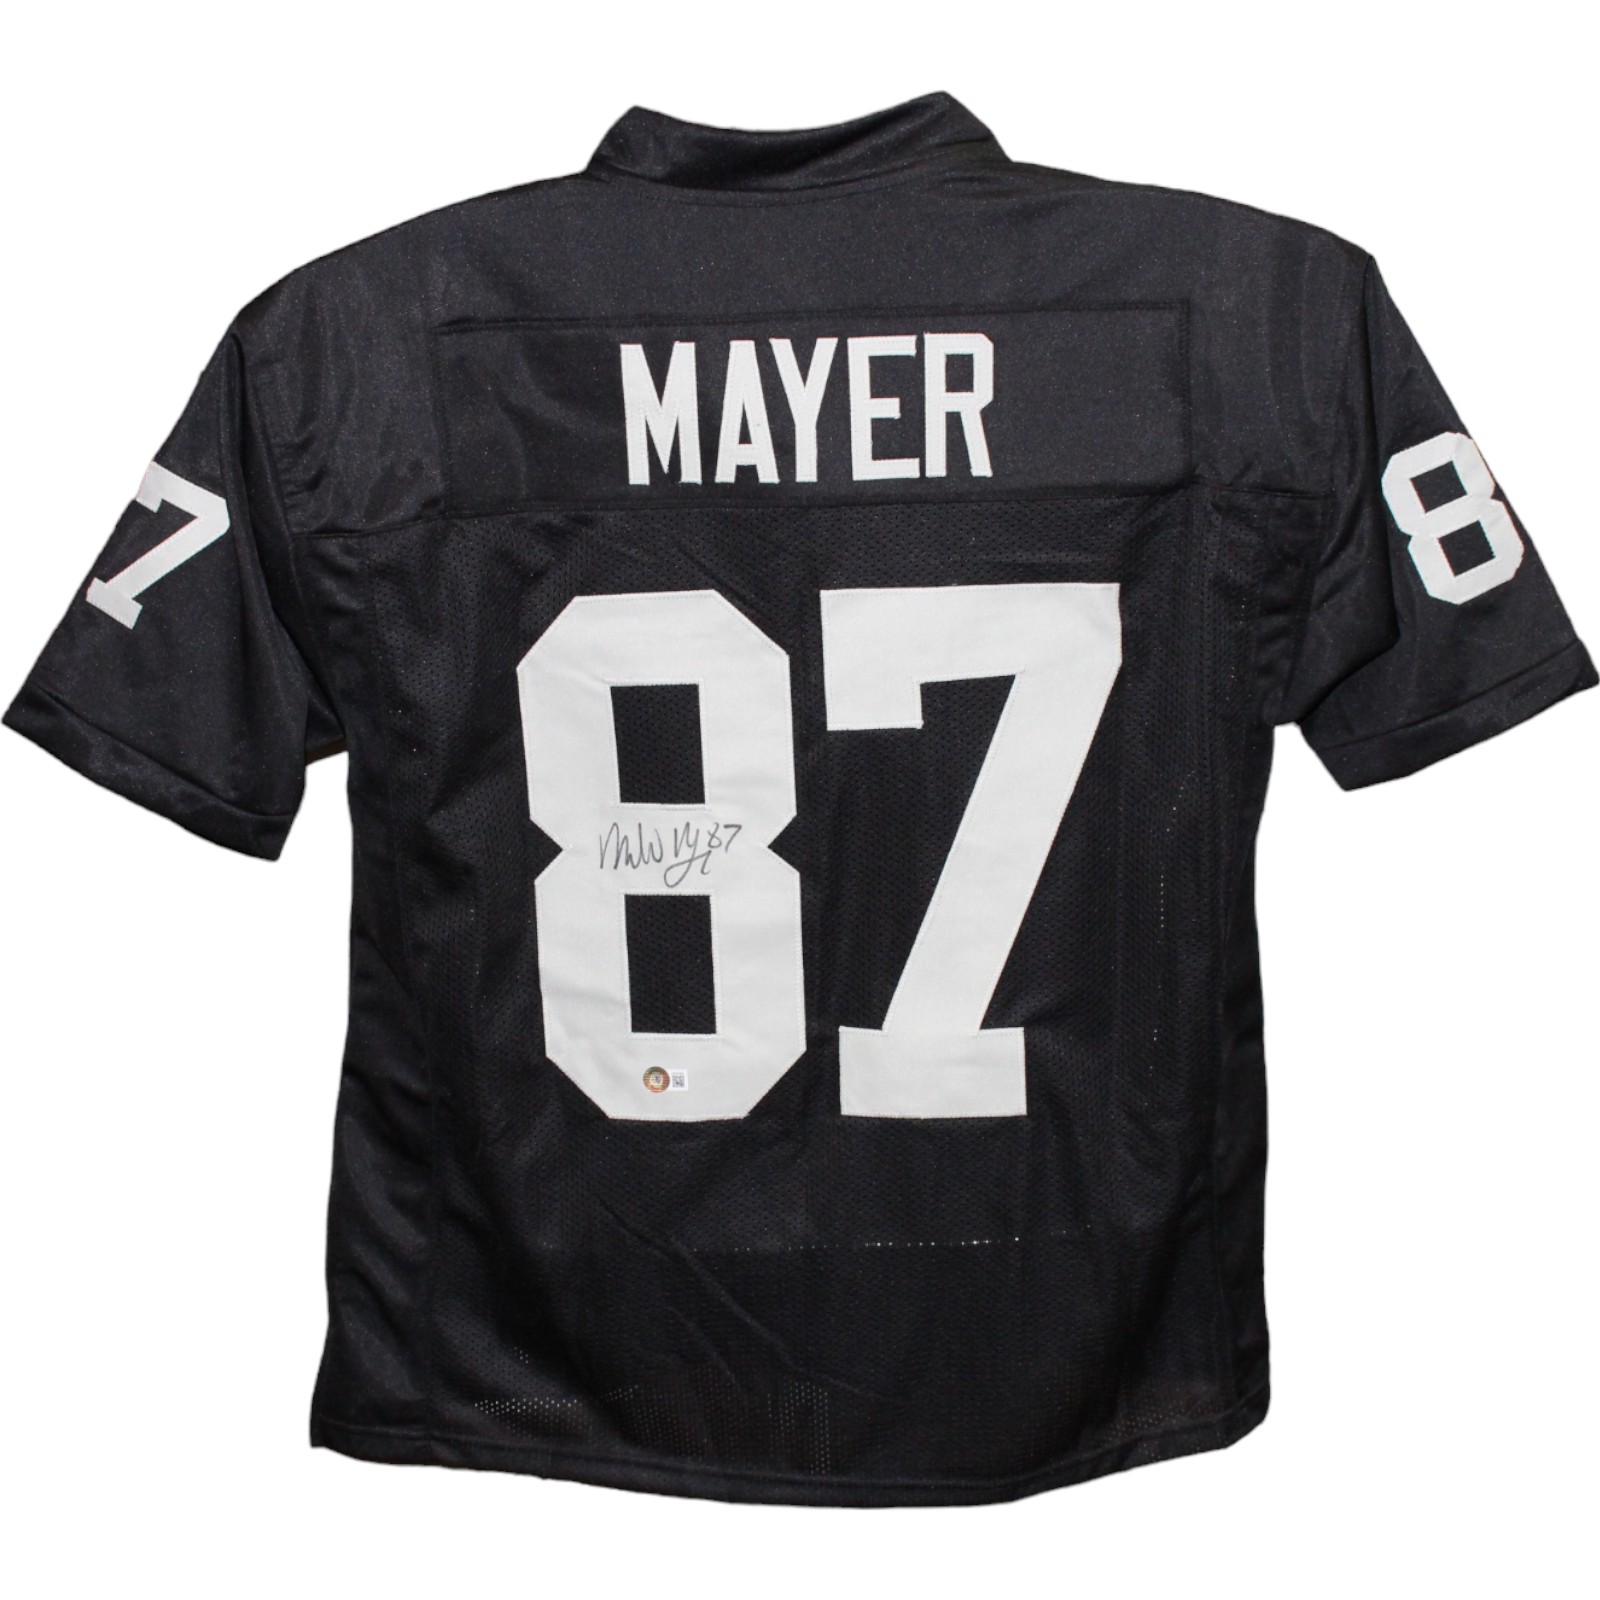 Michael Mayer Autographed/Signed Pro Style Black Jersey Beckett